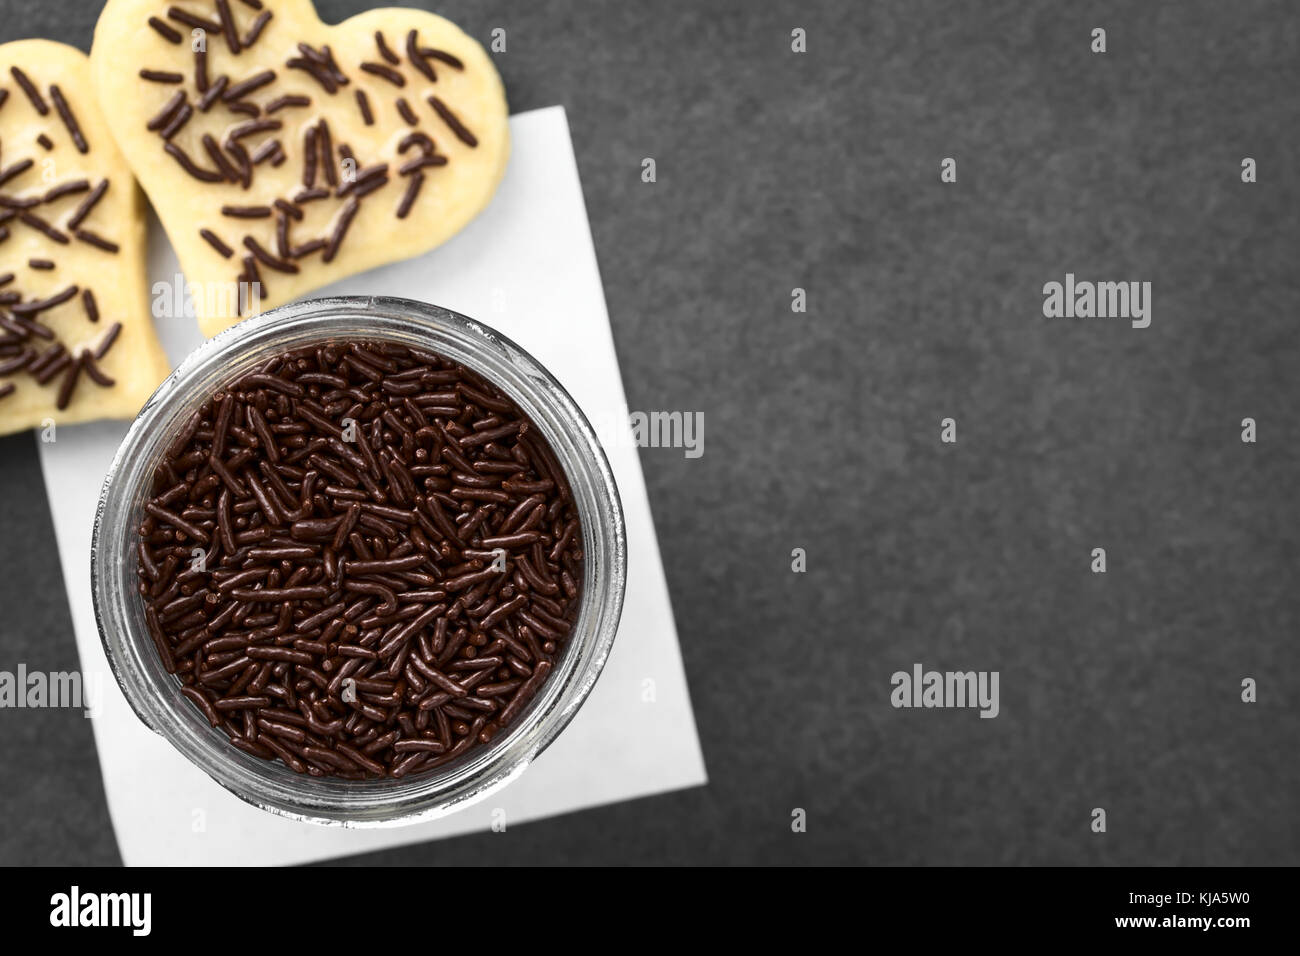 Chocolate sugar sprinkles in glass jar, photographed overhead on slate (Selective Focus, Focus on the sprinkles in the jar) Stock Photo